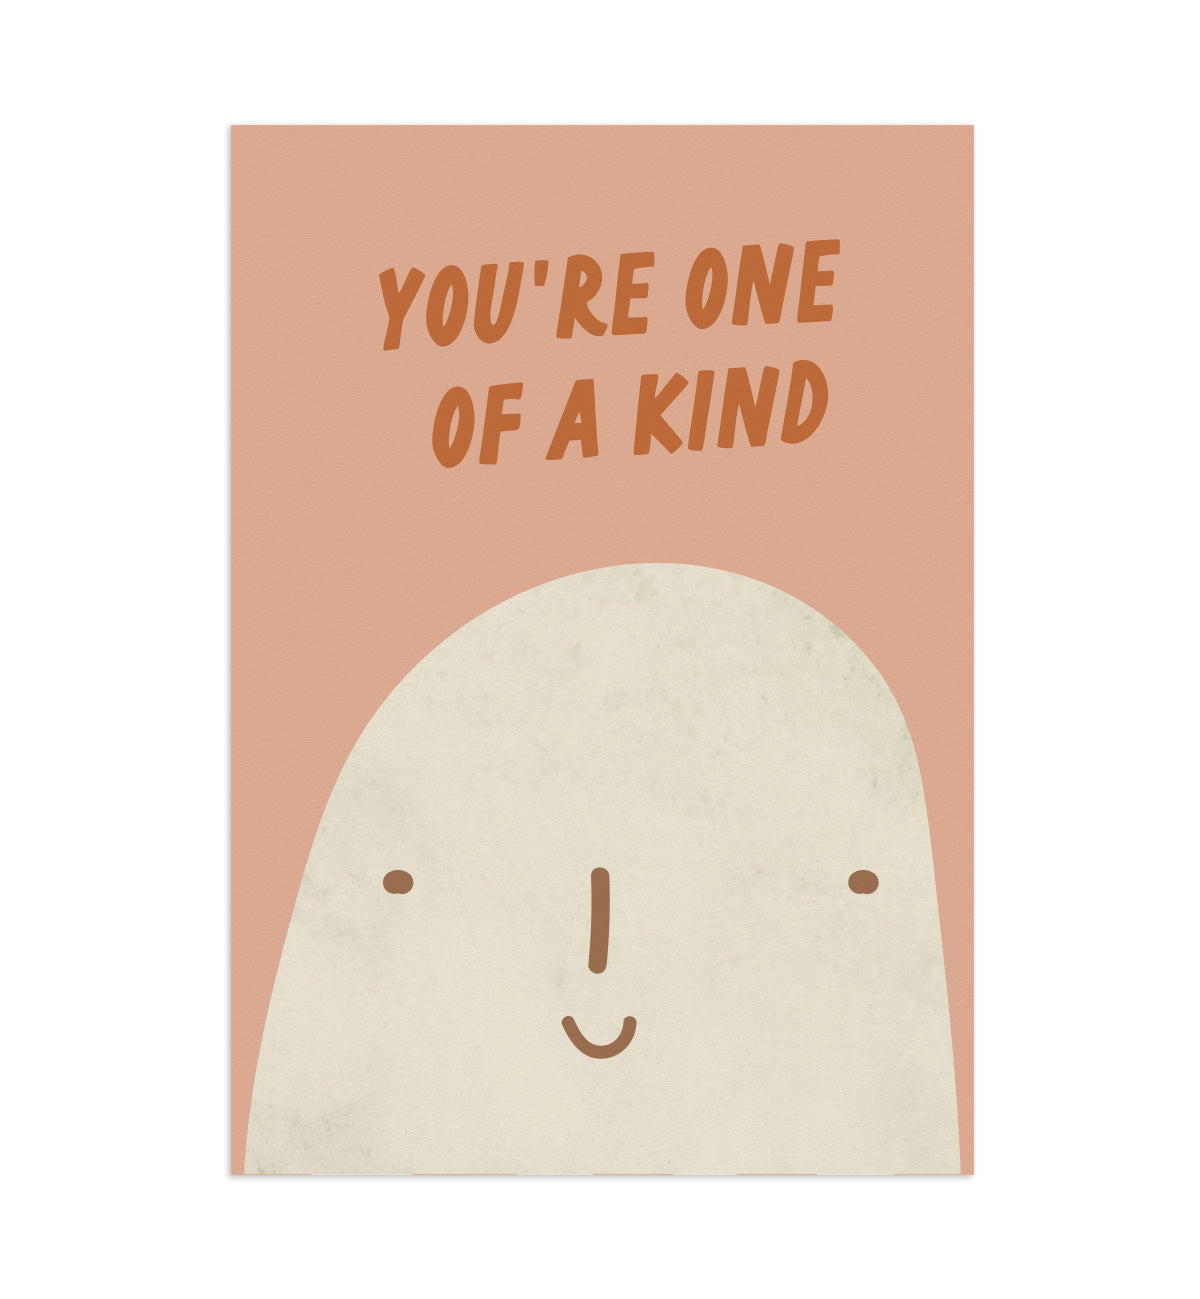 You're one of a kind poster